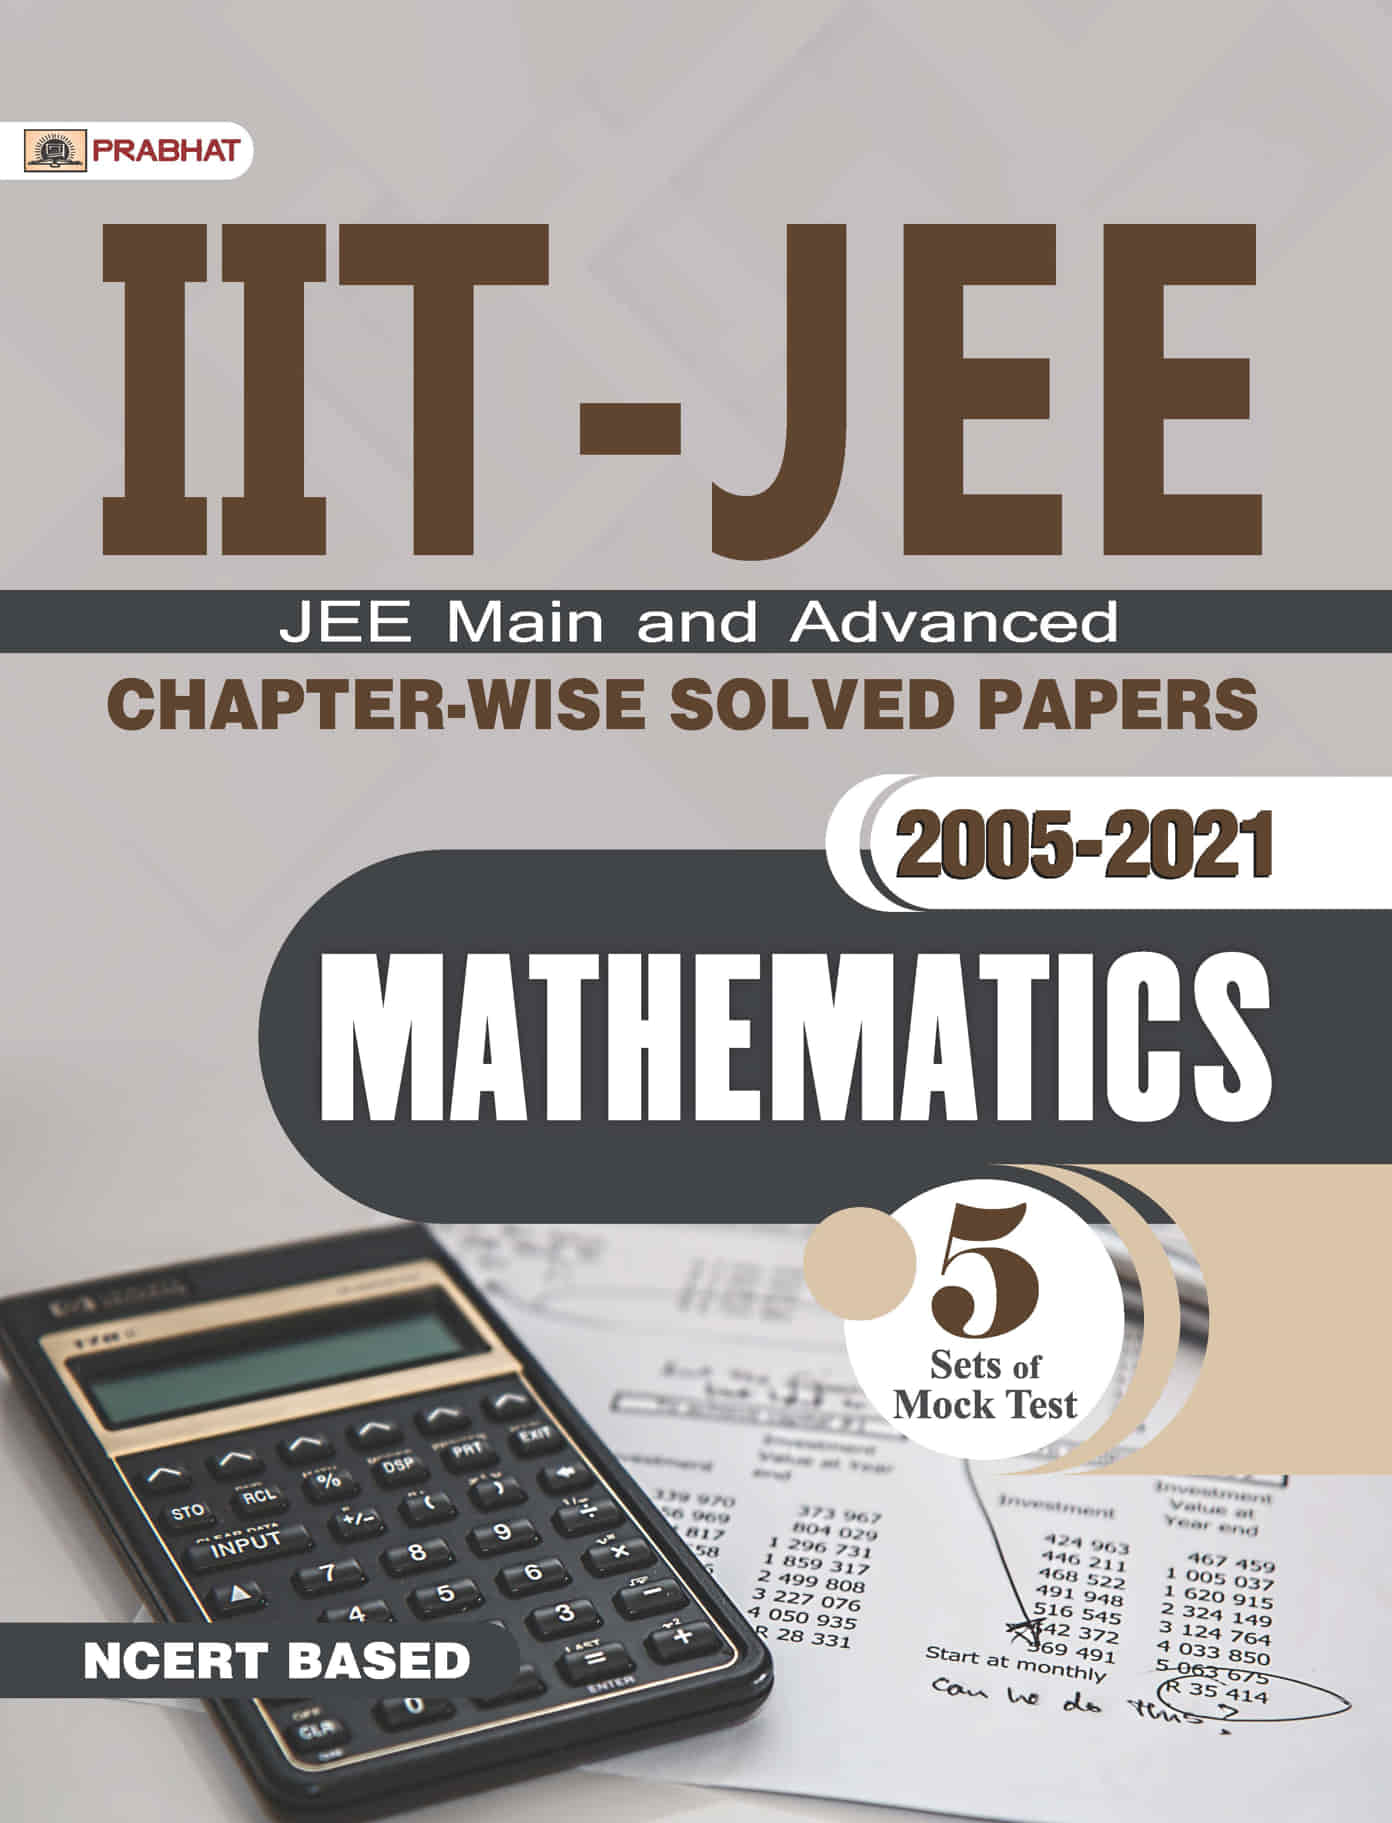 IIT-JEE Main & Advanced Chapter-Wise Solved Papers: 2005-2022 Mathematics (NCERT Based) 